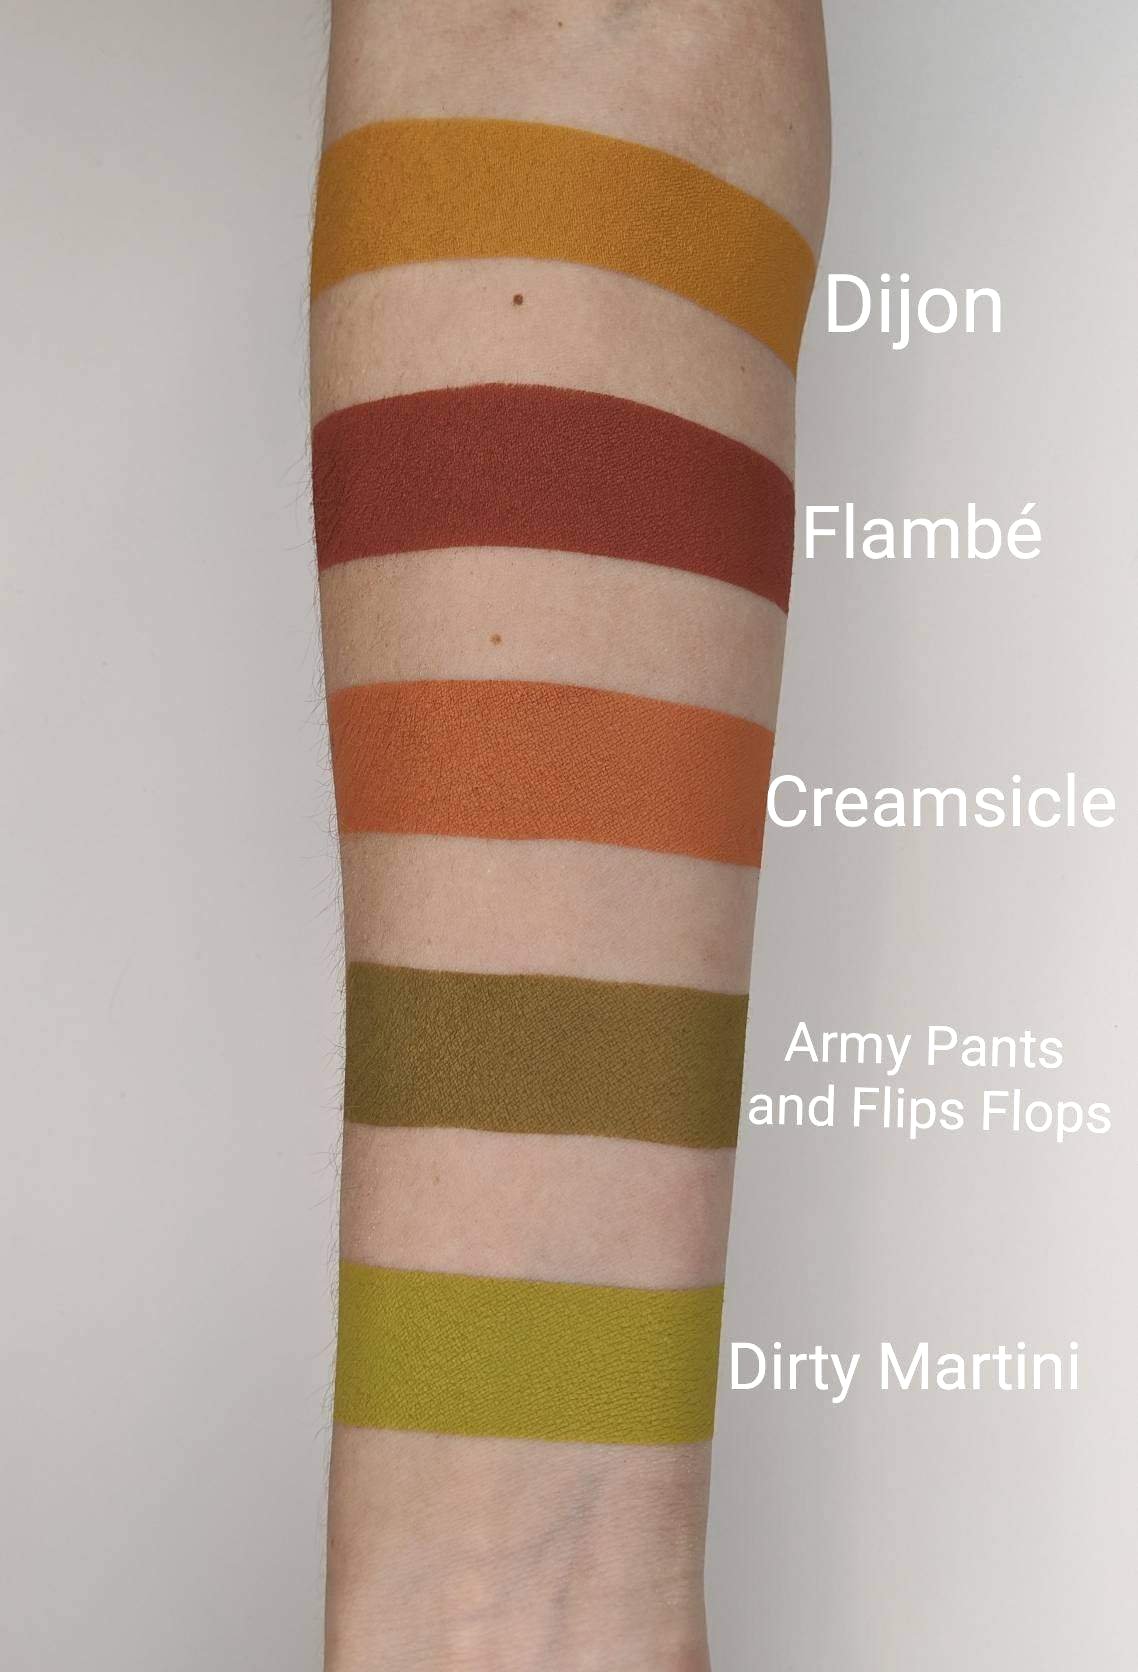 Army Pants And Flip Flops - Matte Eyeshadow Earthy Olive Green